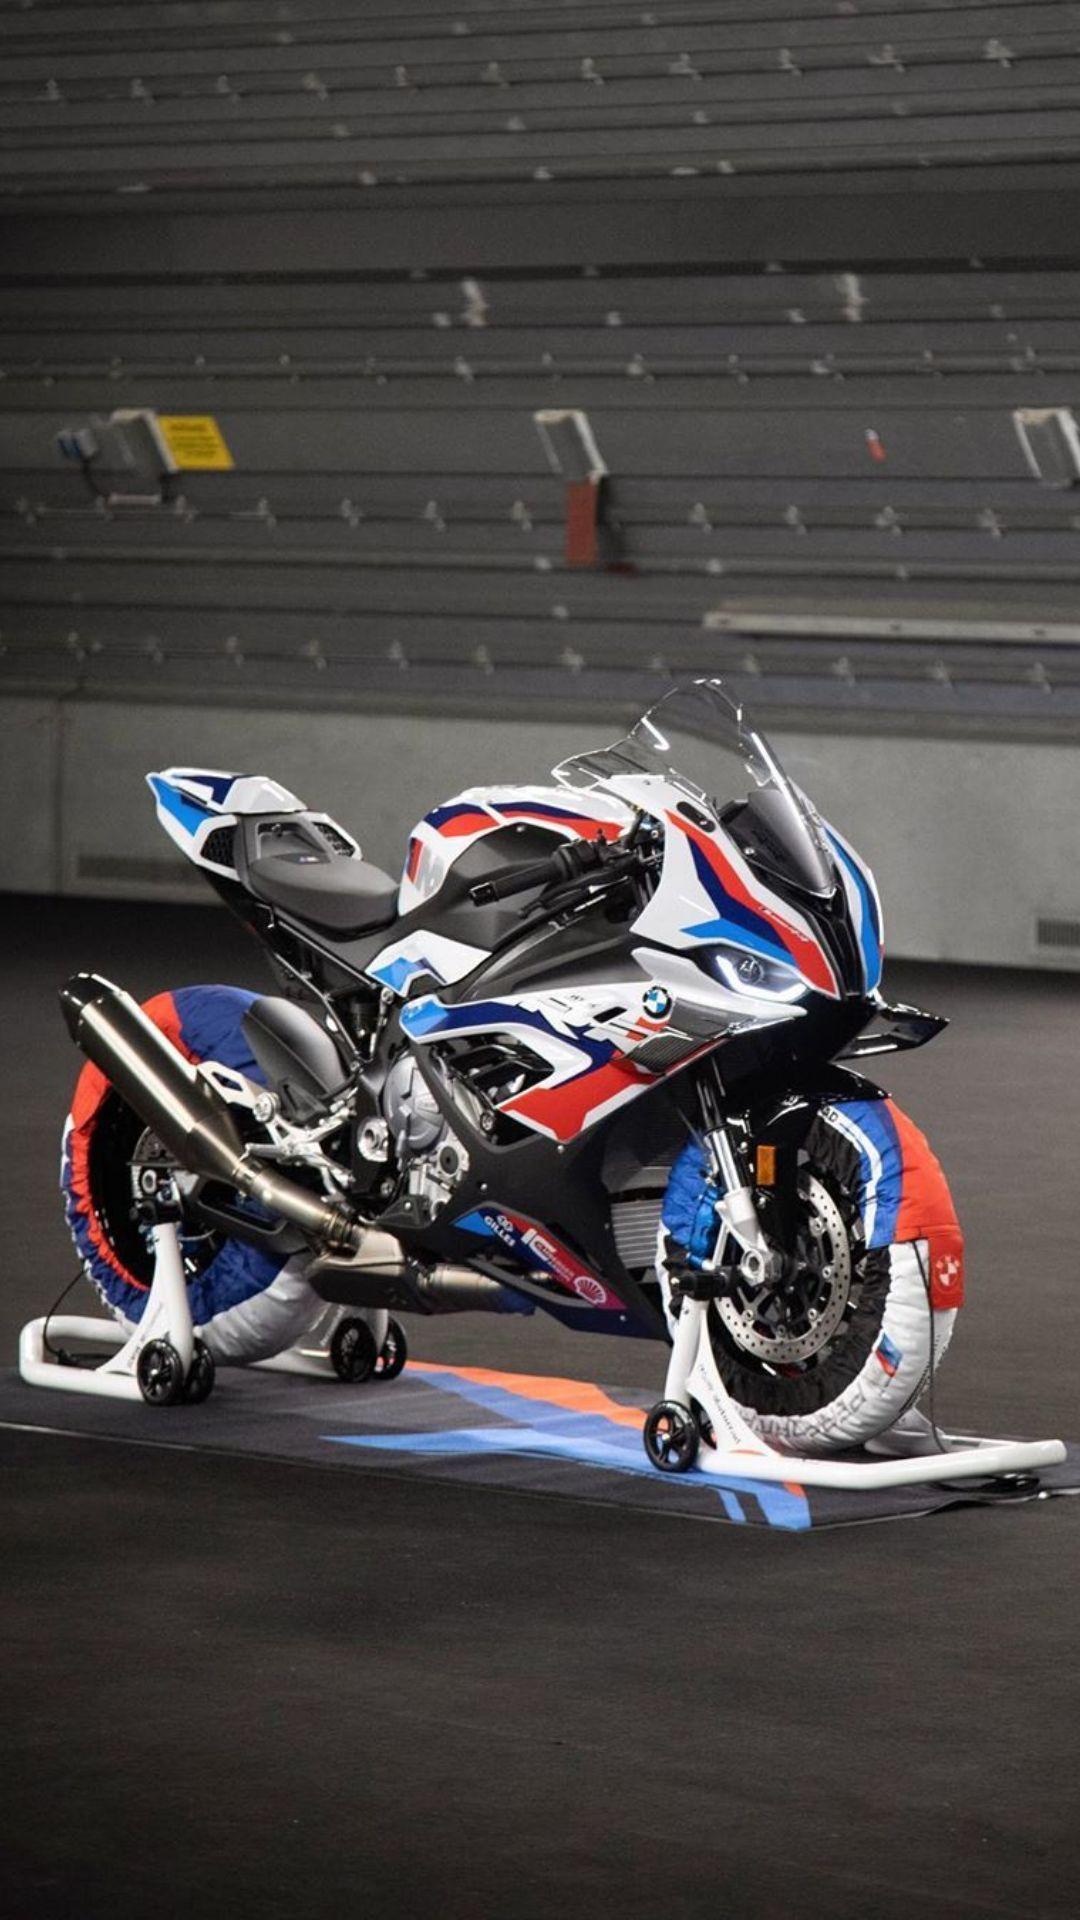 BMW M 1000 RR Wallpapers - Top Free BMW M 1000 RR Backgrounds ...